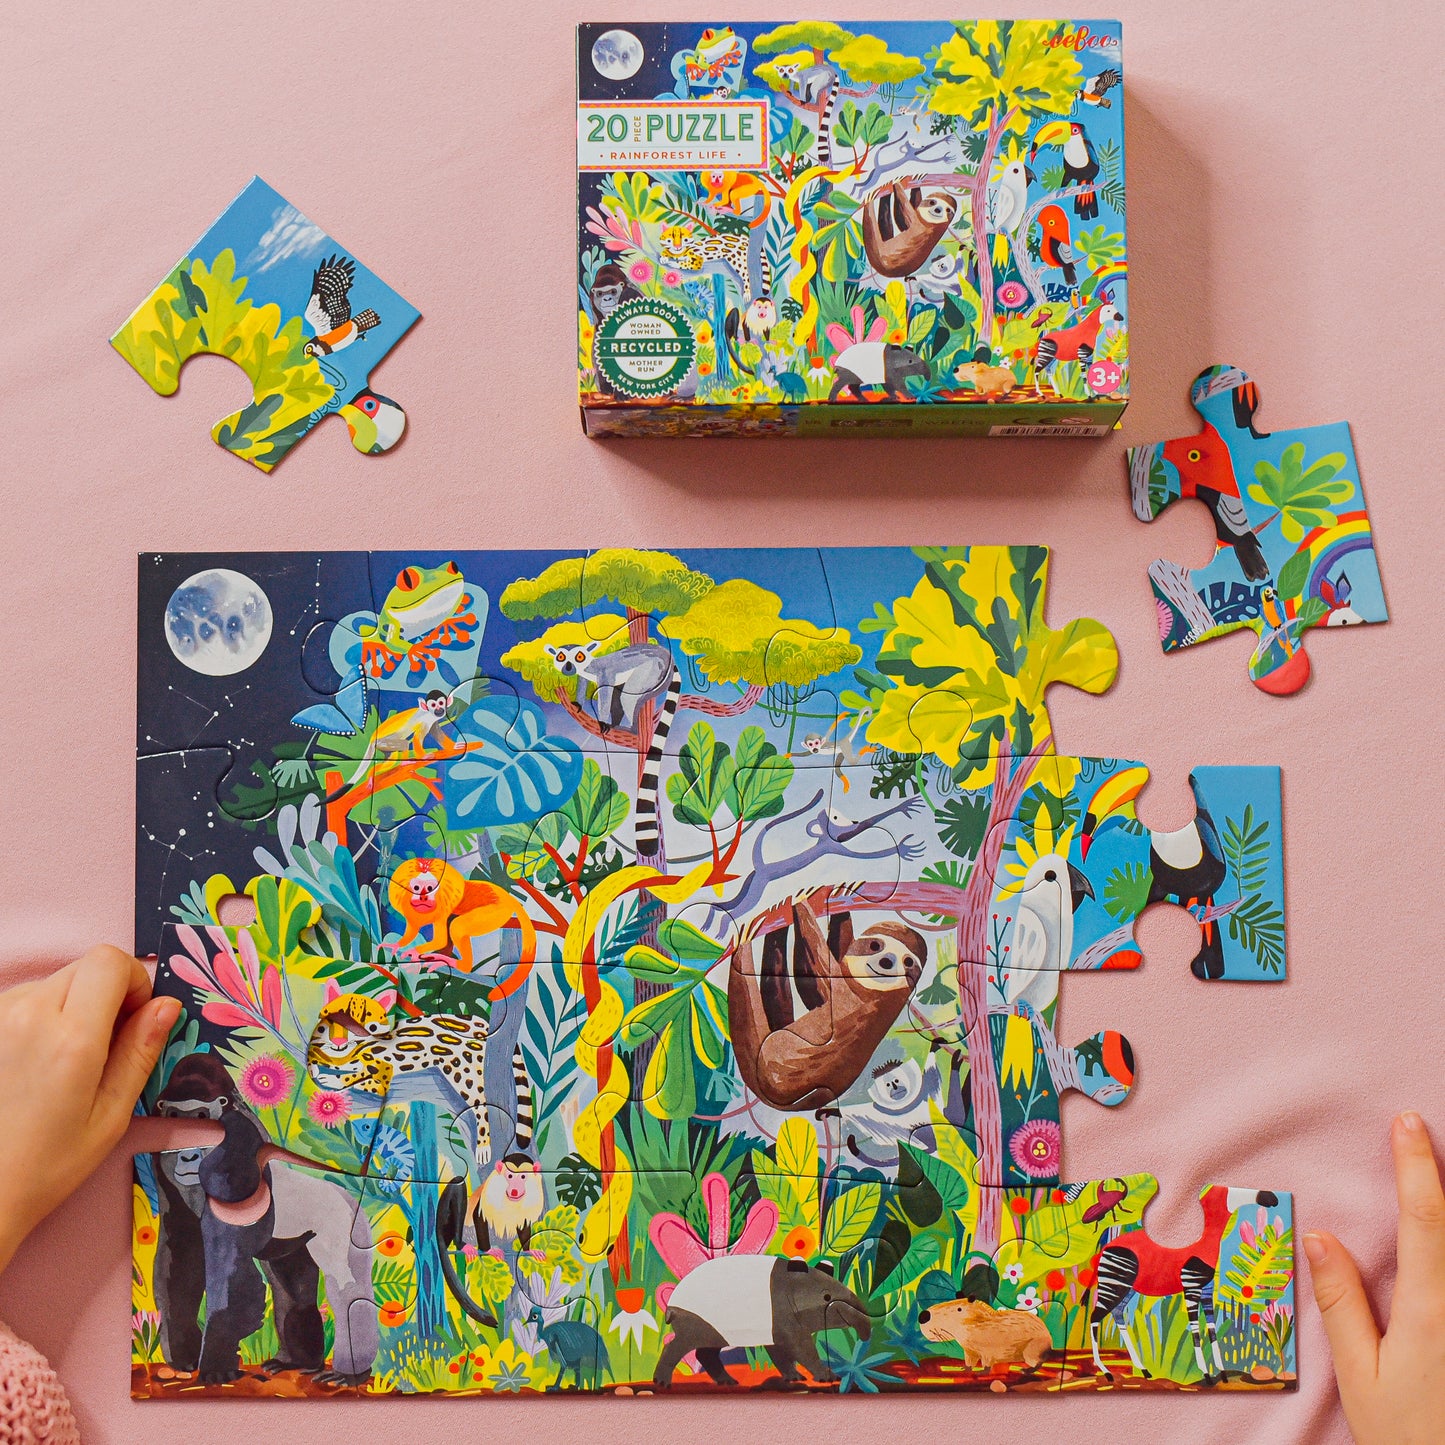 Rainforest Animal Life 20 Piece Jigsaw Puzzle | eeBoo | Makes a Great Gift for Pre-School Kids 3+